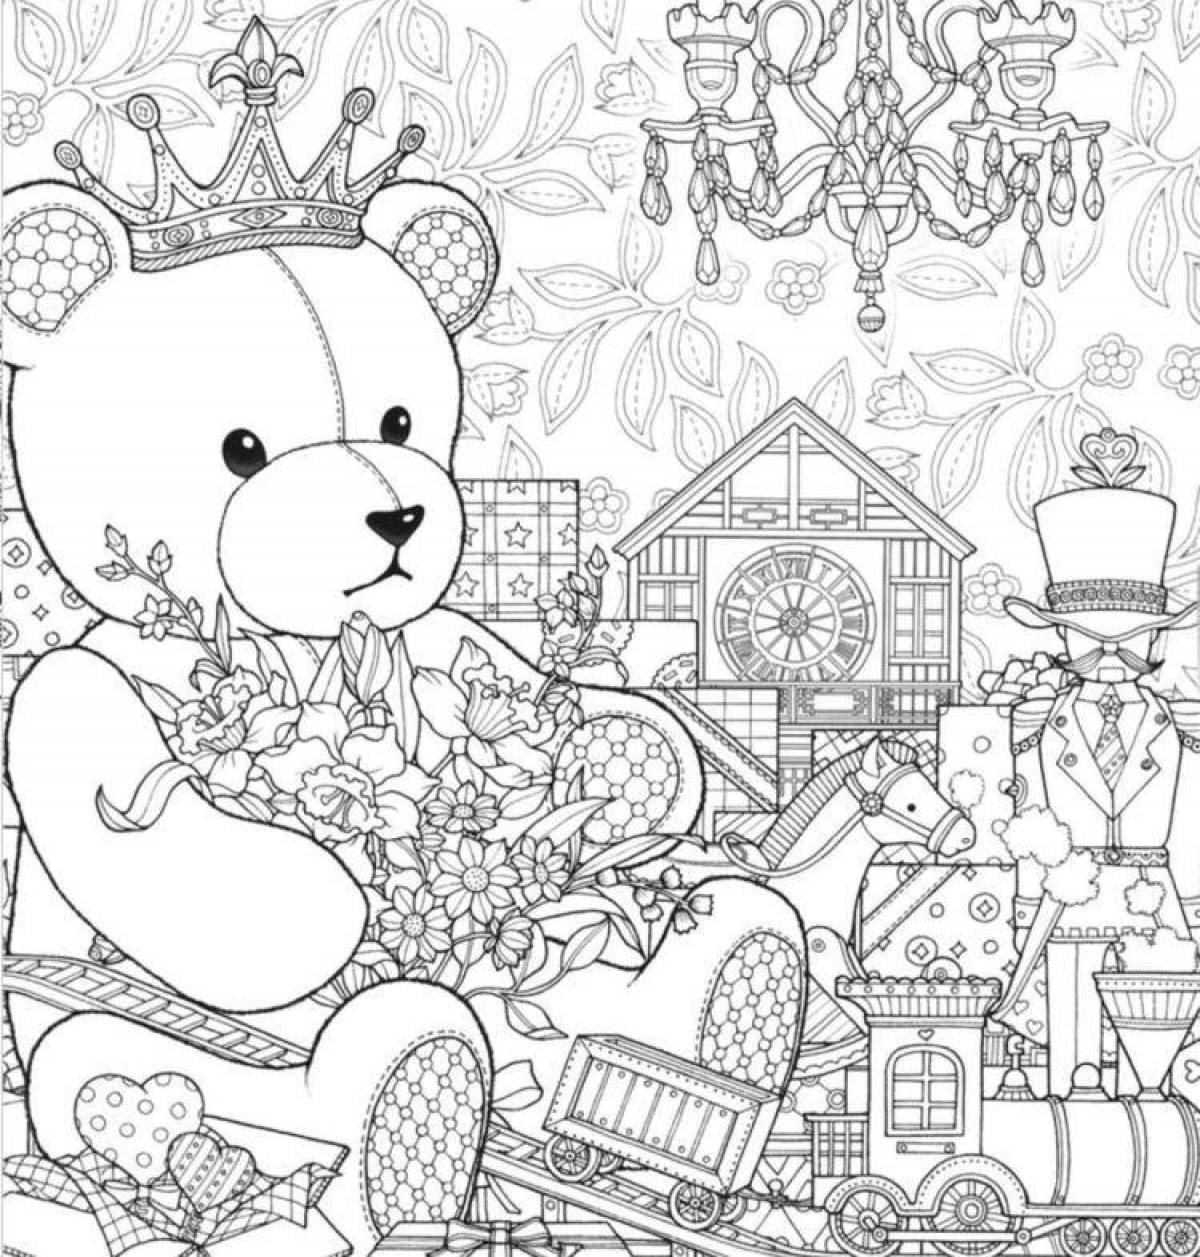 Live Christmas coloring book for adults